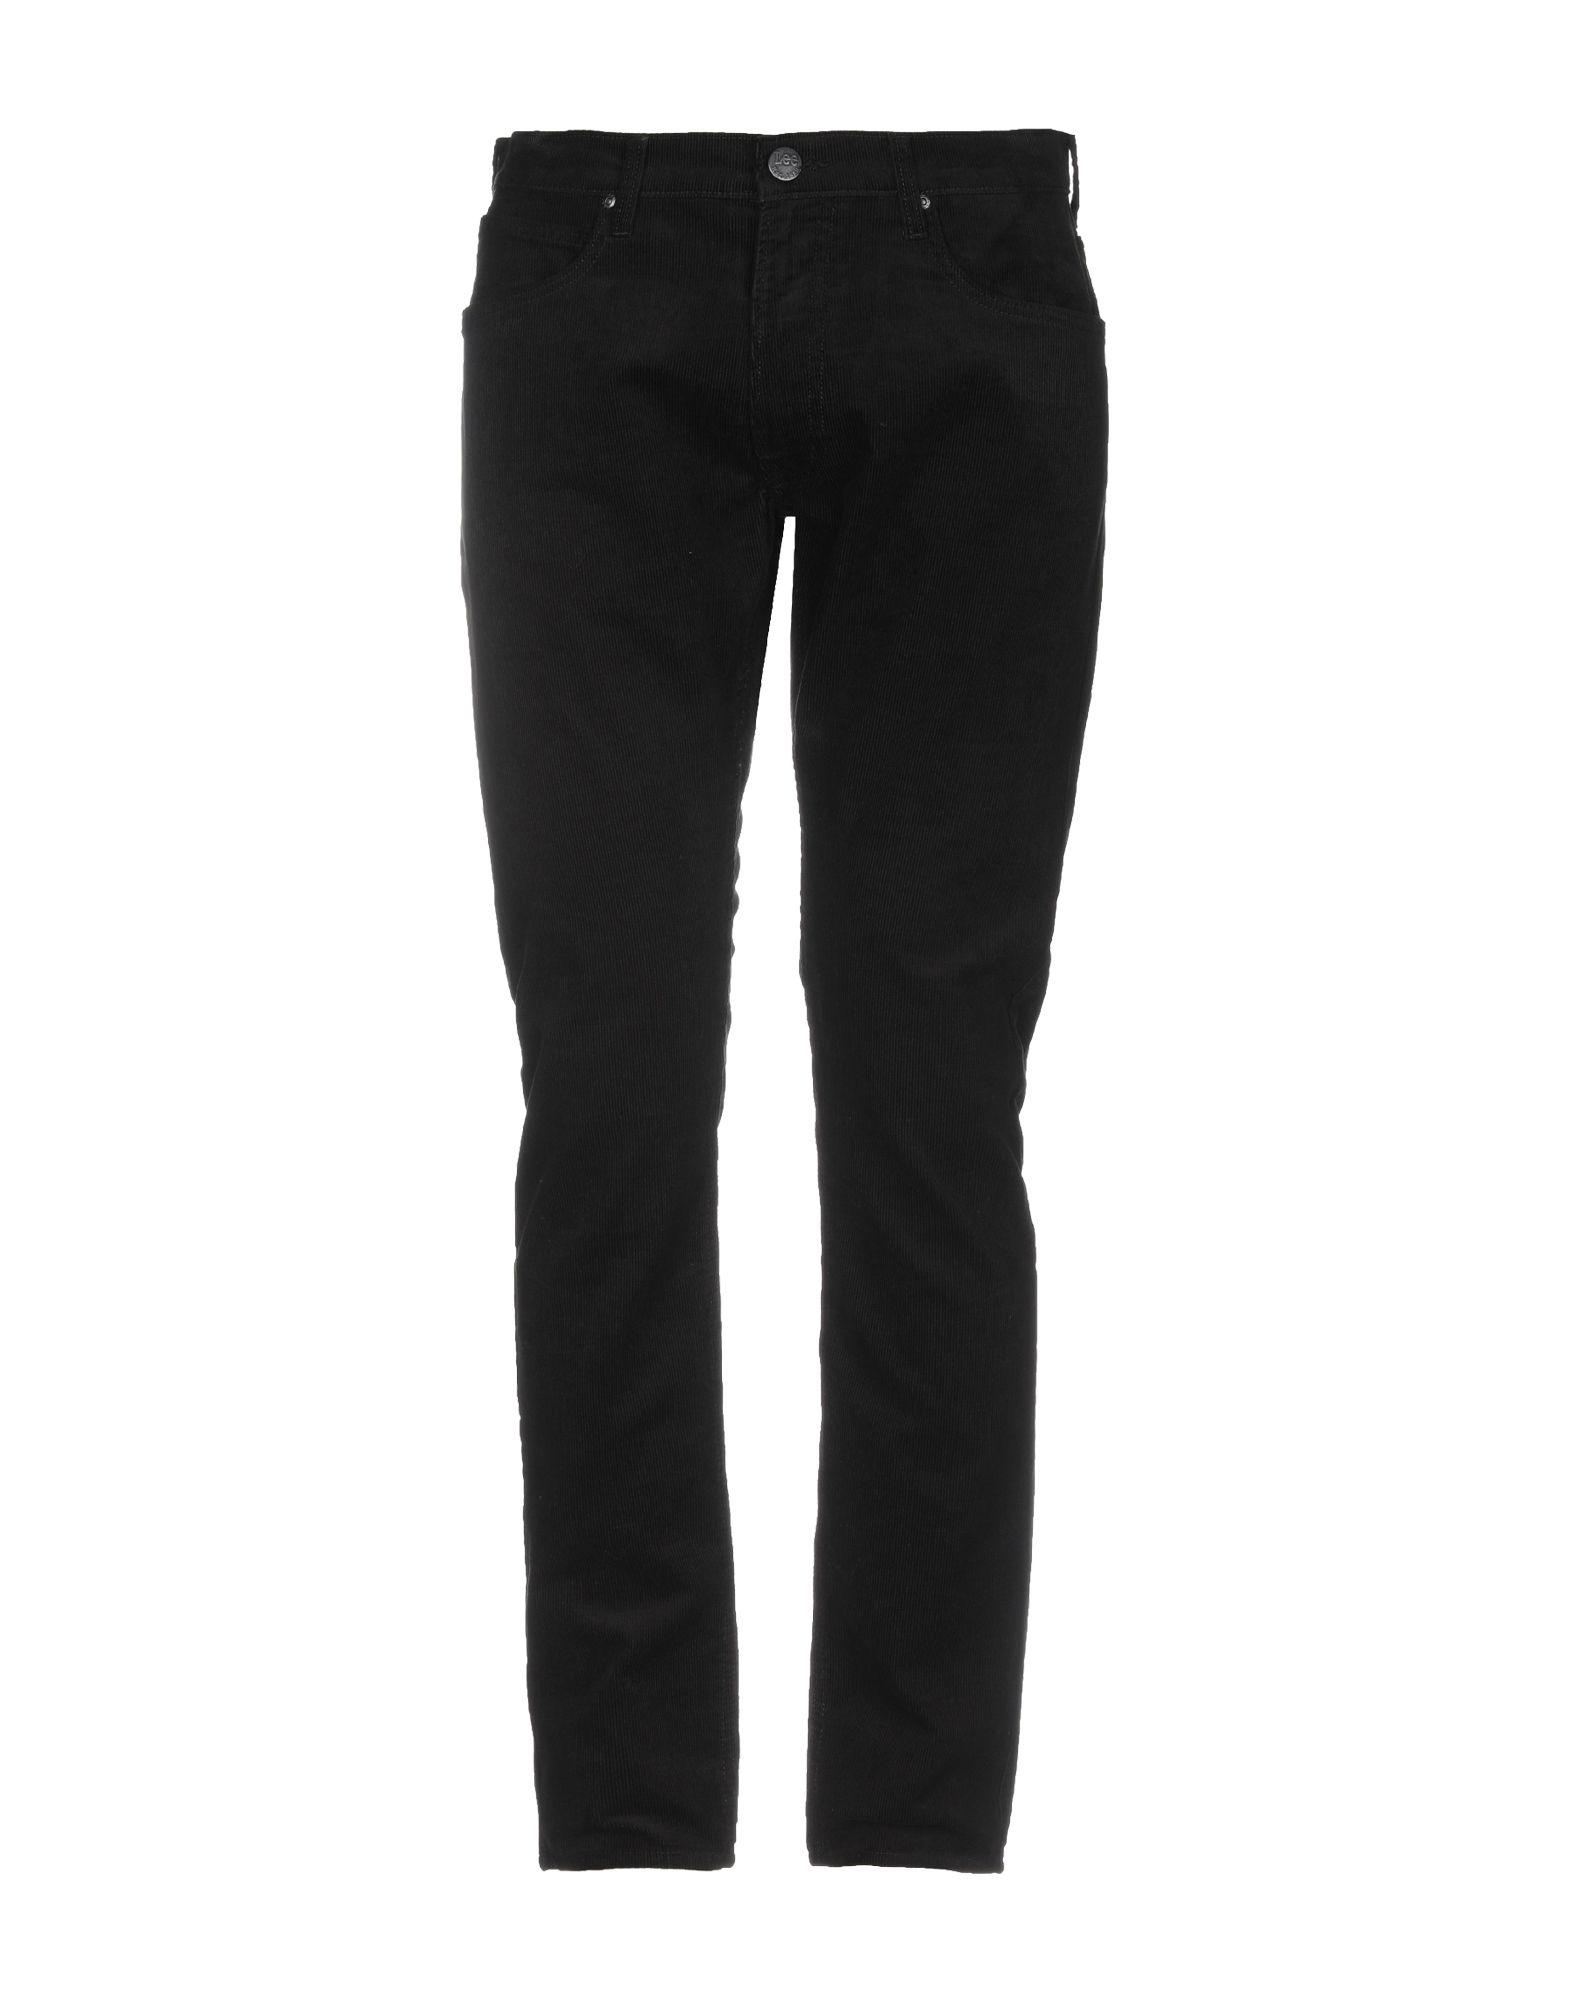 Lee Jeans Casual Pants in Black for Men - Lyst